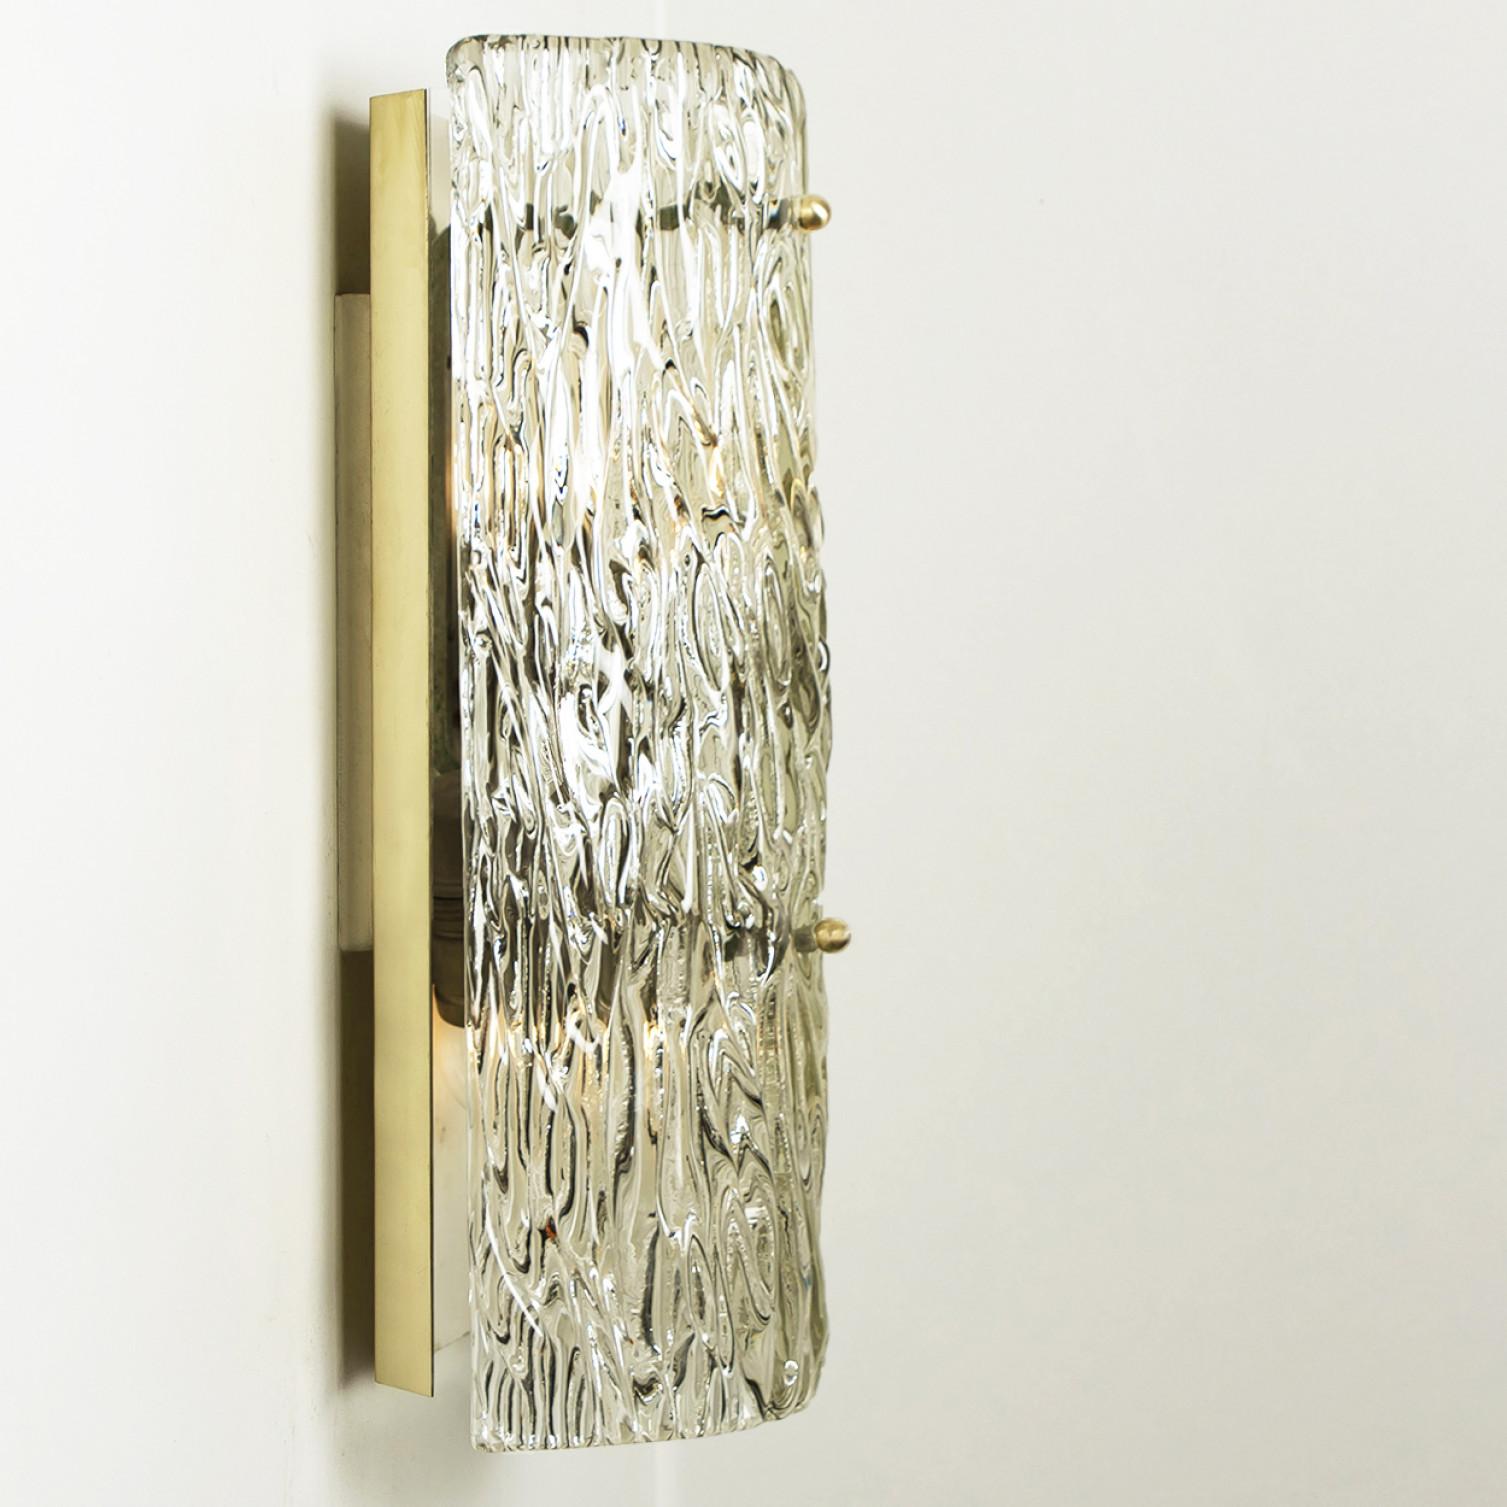 One of Four Large Modern Brass Ice Glass Wall Lights by J. T. Kalmar, 1960s For Sale 4